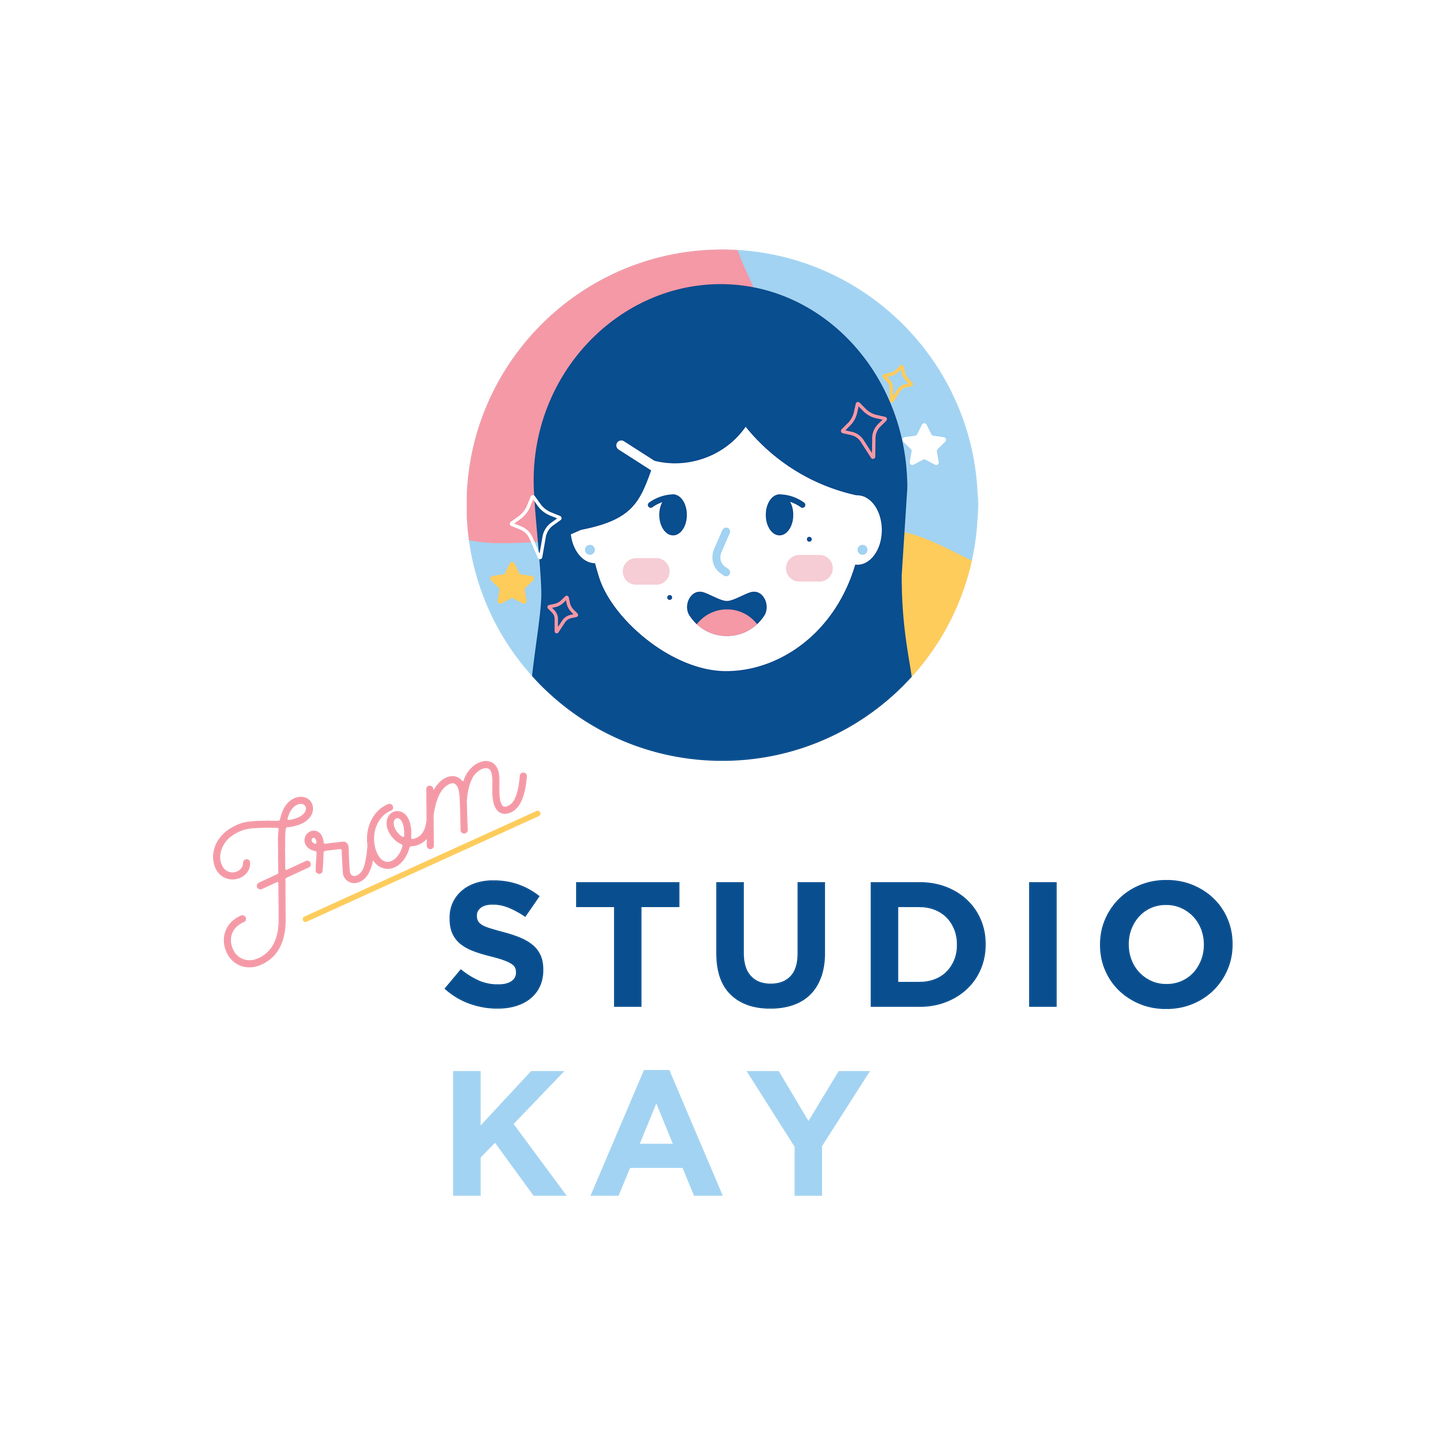 [[From Studio Kay]] Gift card